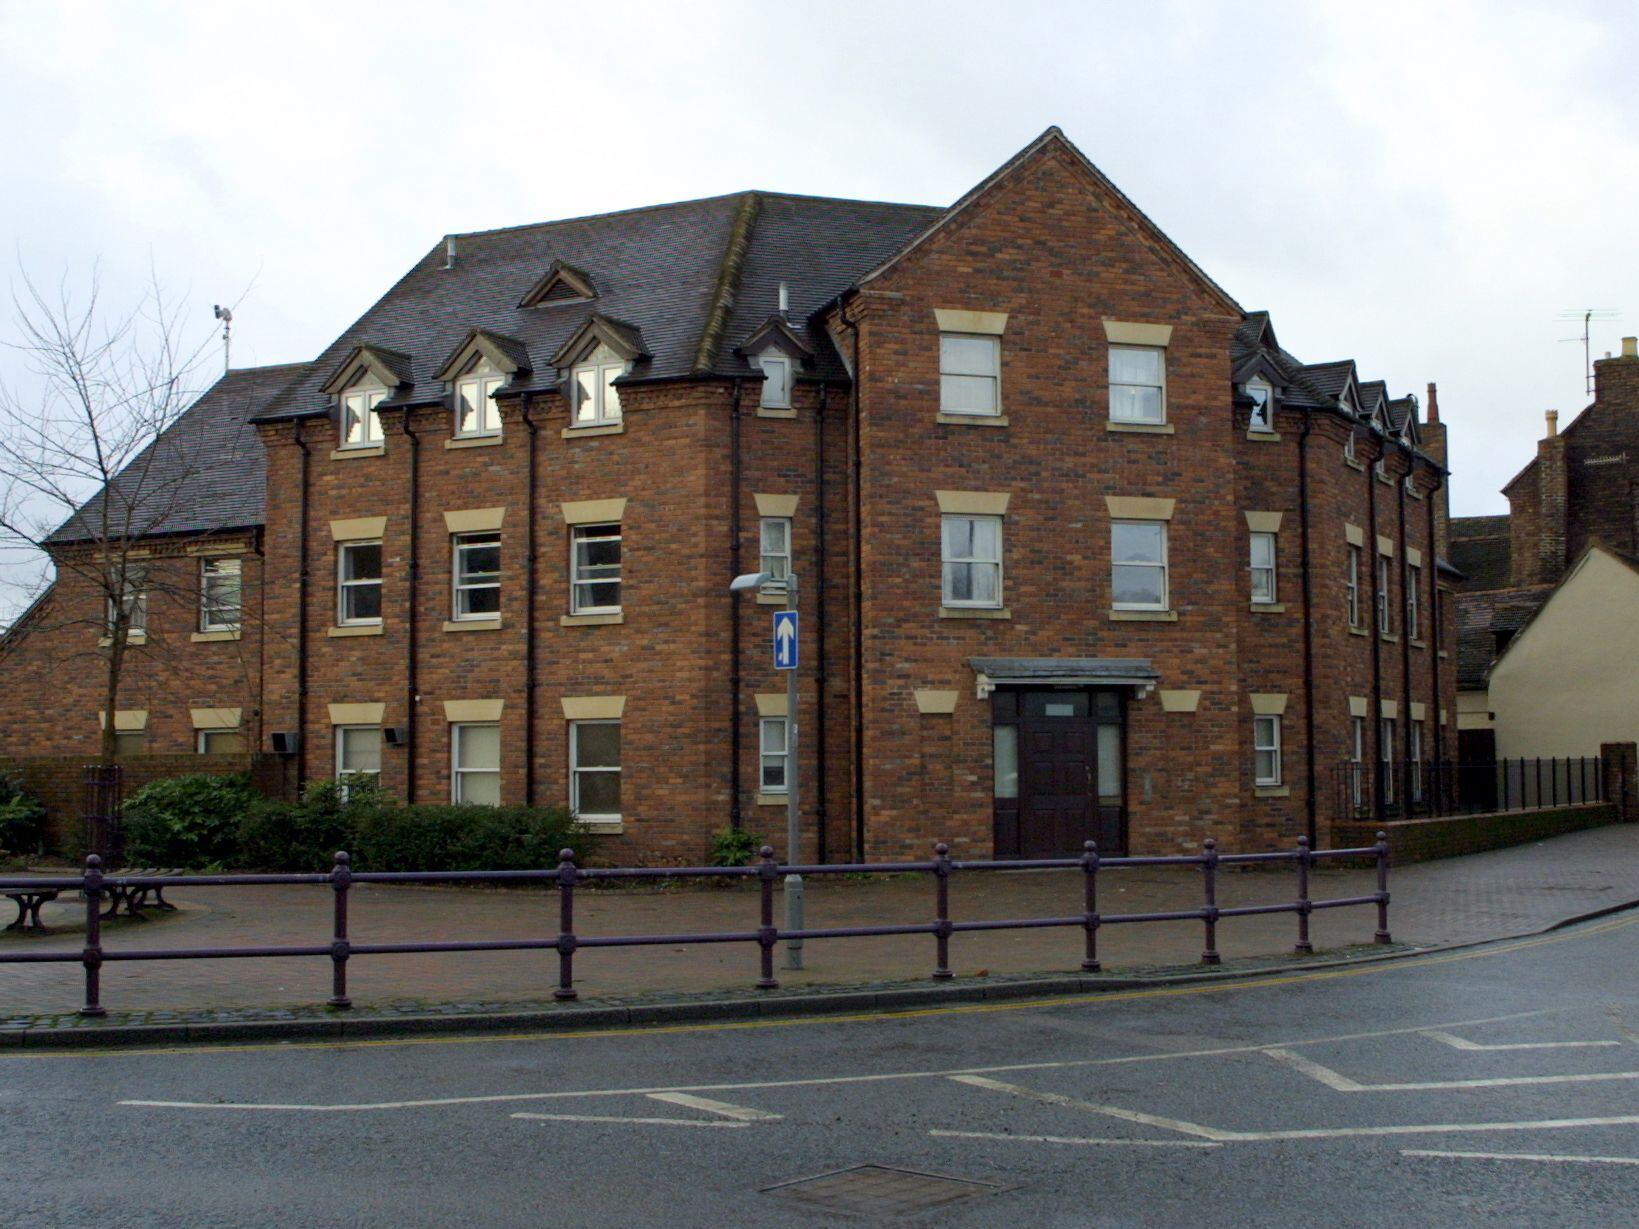 Council set to buy 'eyesore' homeless shelter in Bridgnorth that has sat empty since 2020